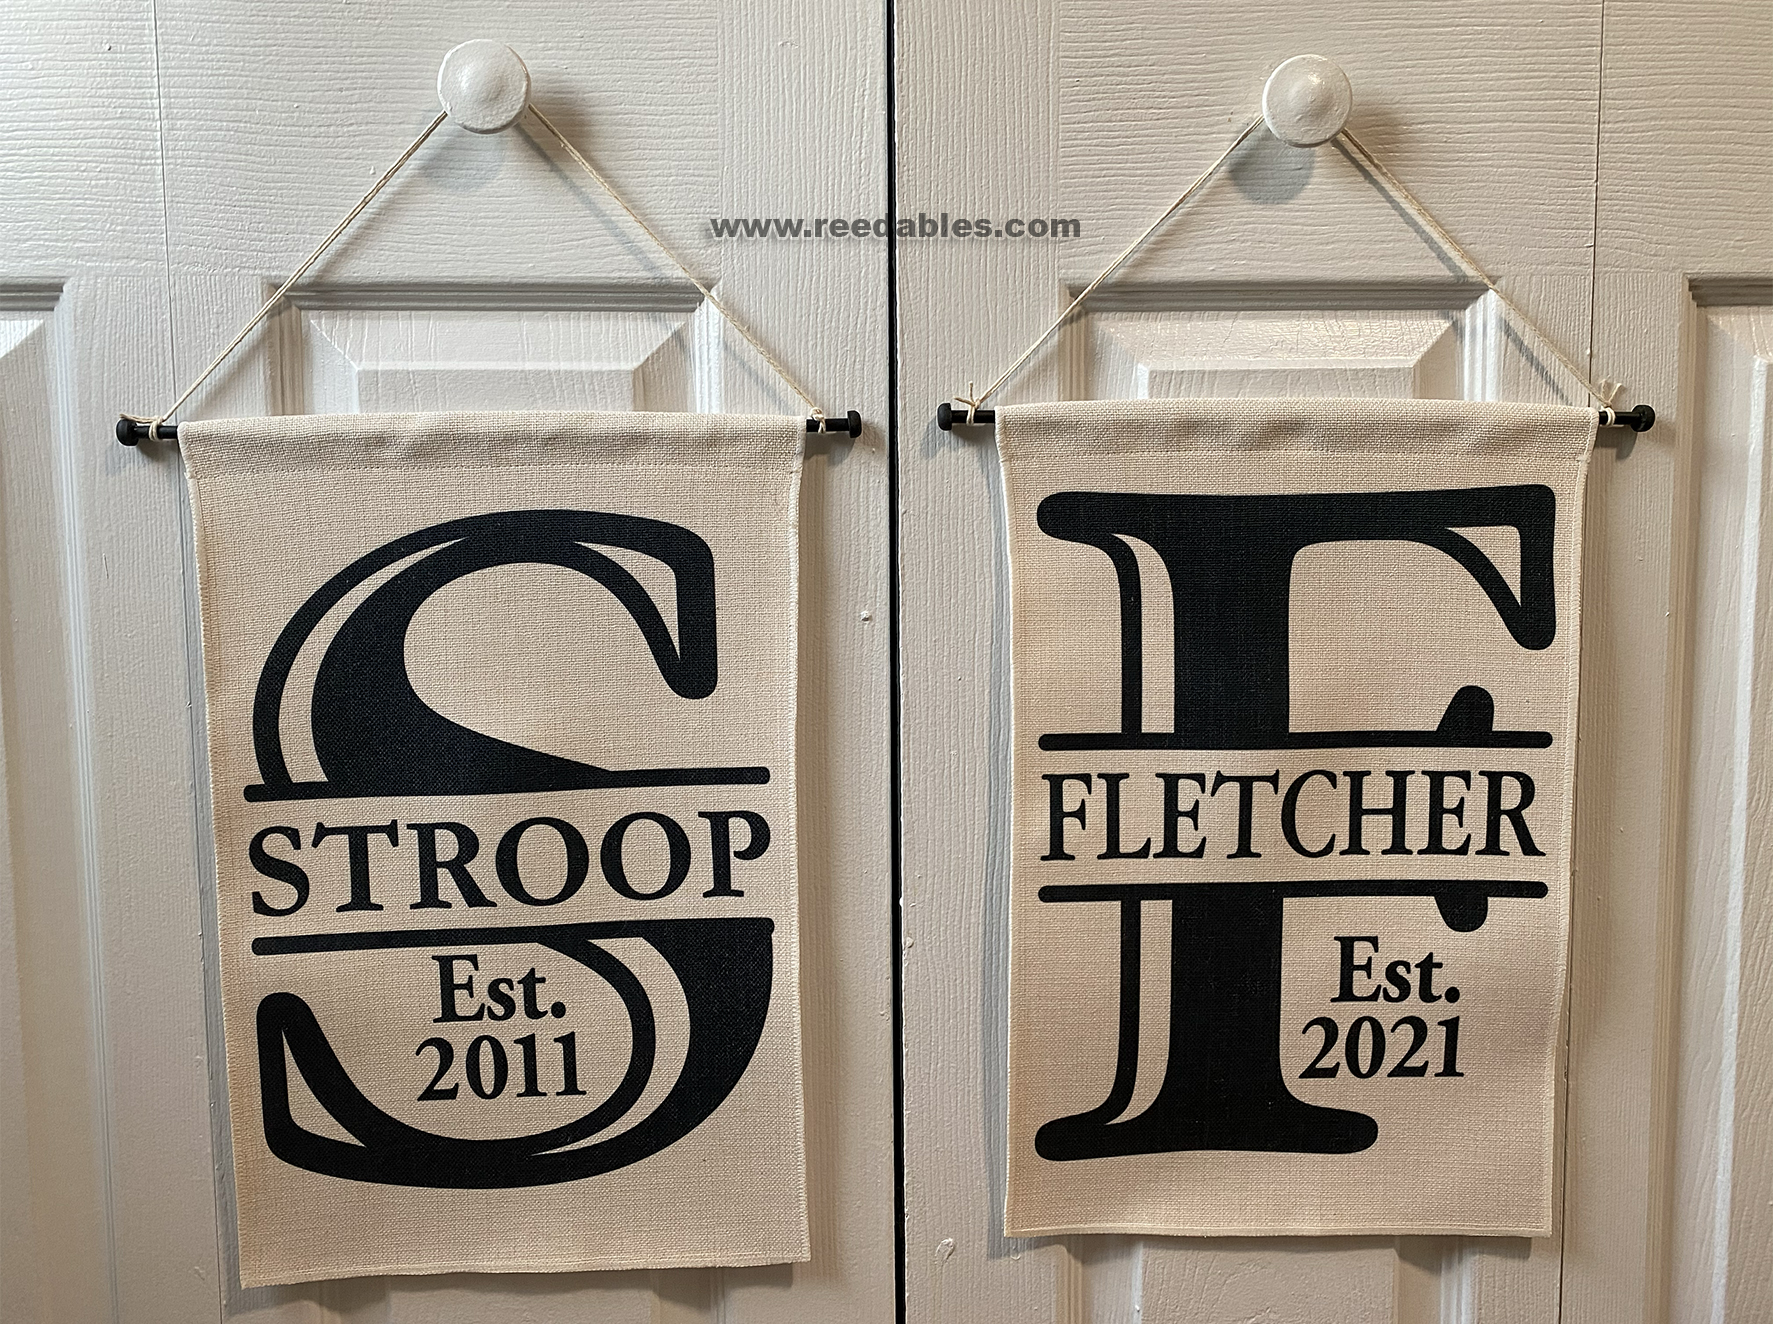 This beautiful monogrammed linen door hanger/flag is a charming addition to your home as a home